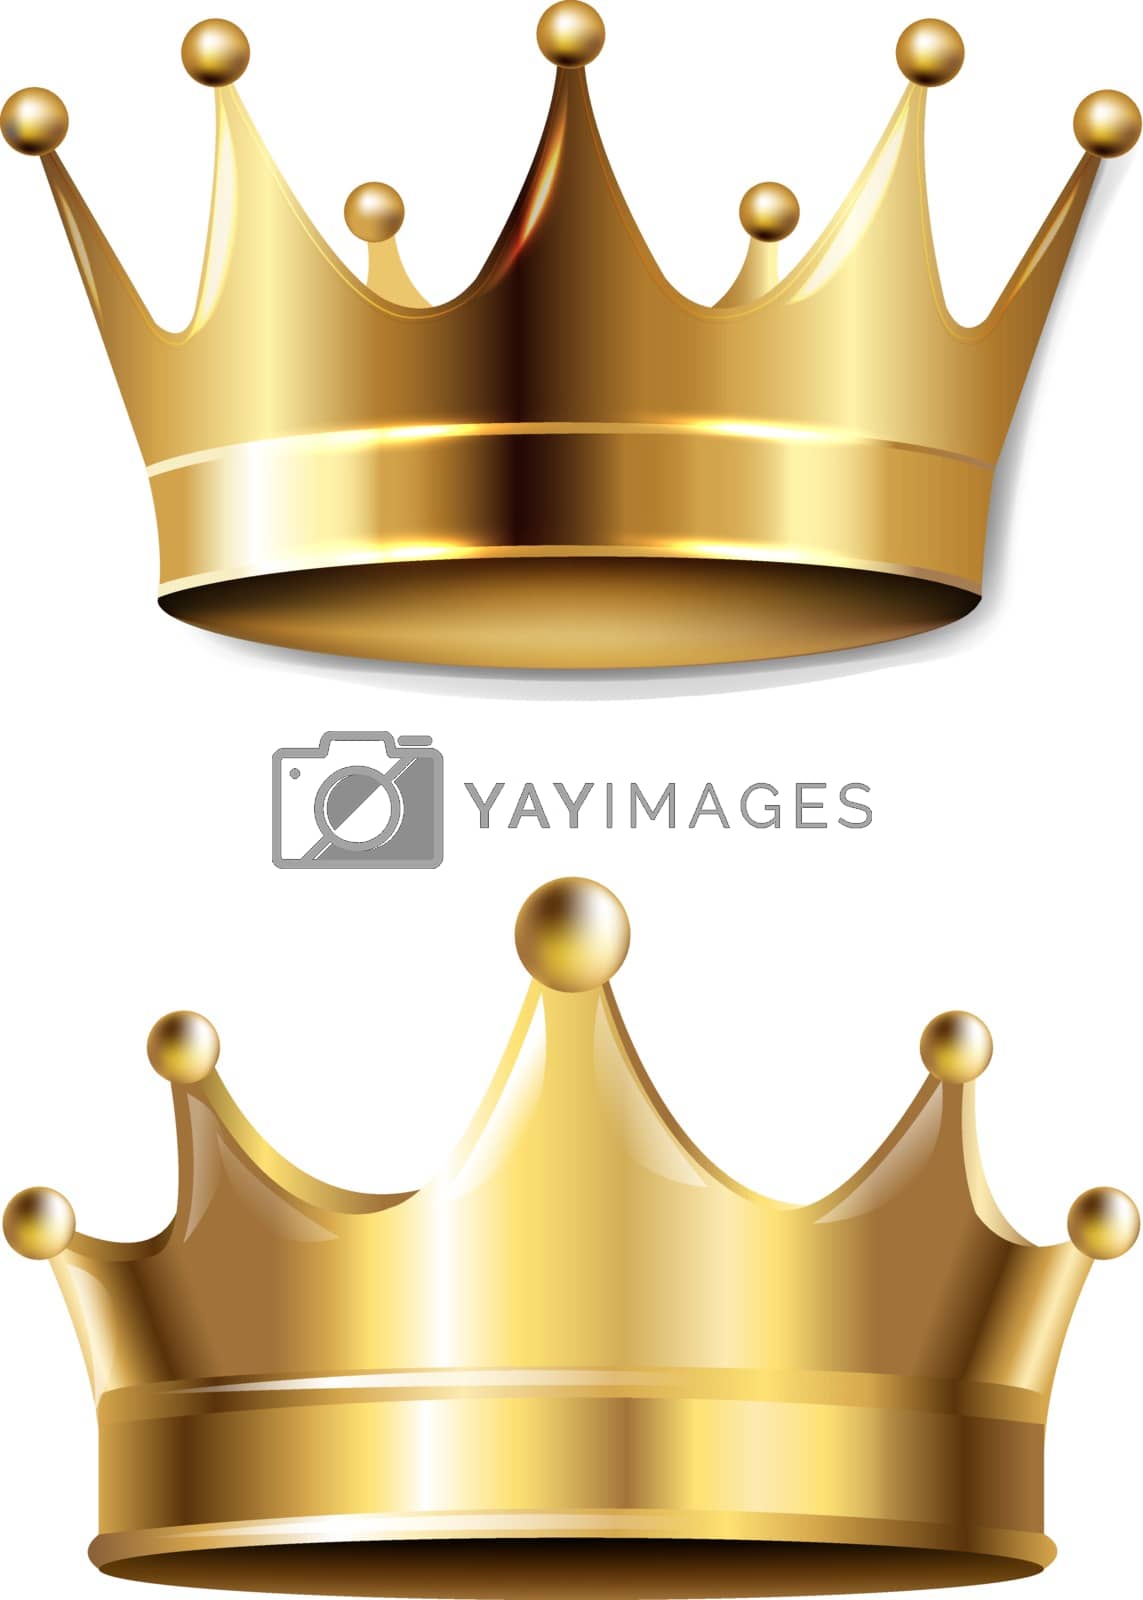 Royalty free image of Crown Set Isolated by barbaliss